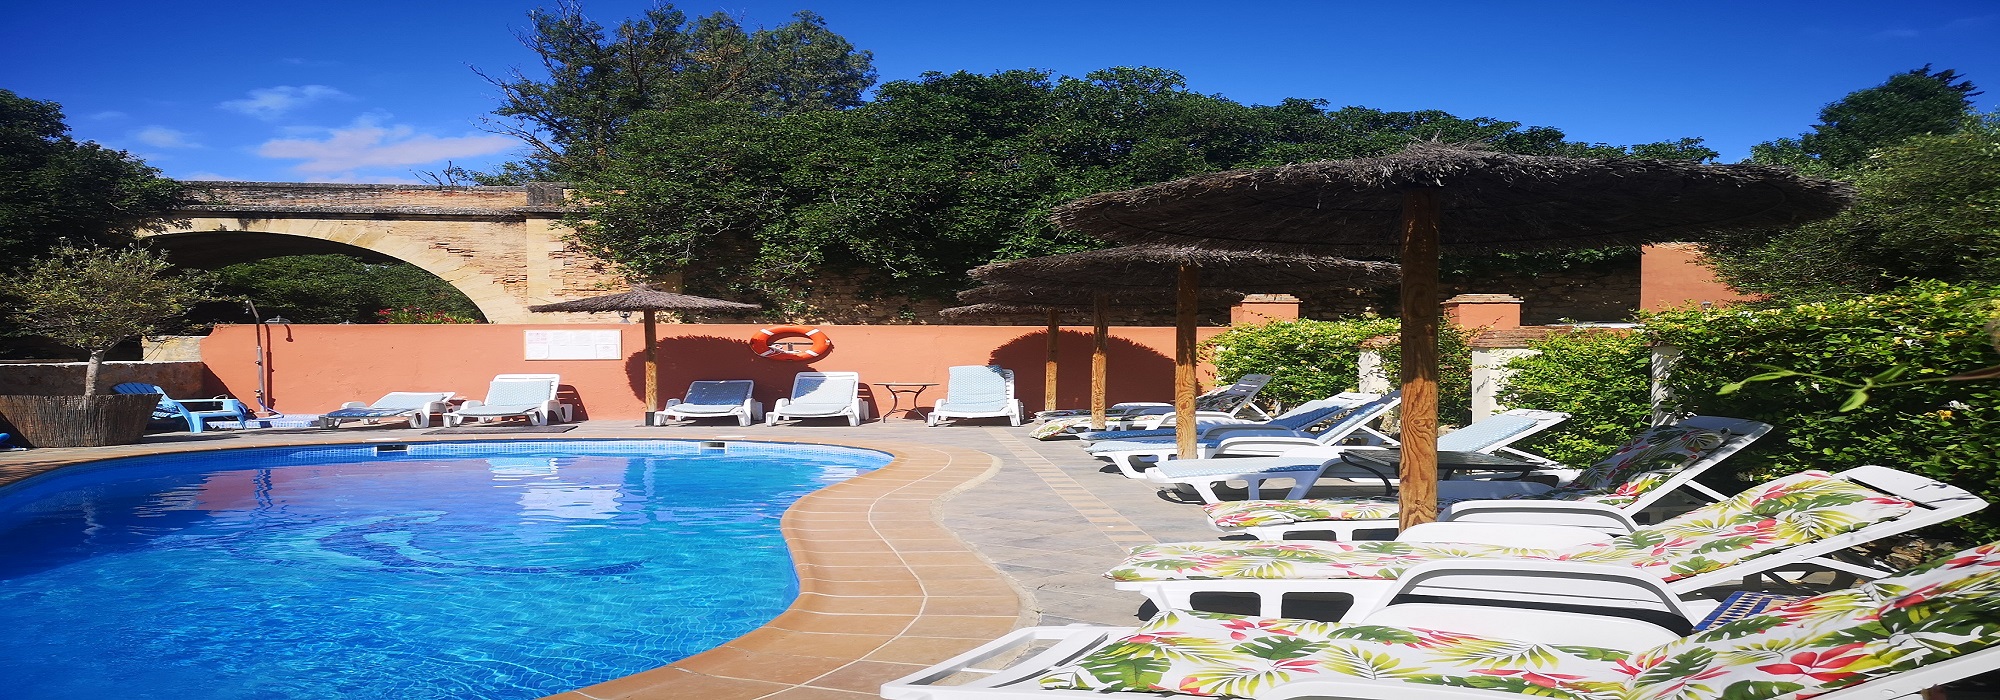 Boutique Hotel, 13 Beds, Owner Accommodation, Pool